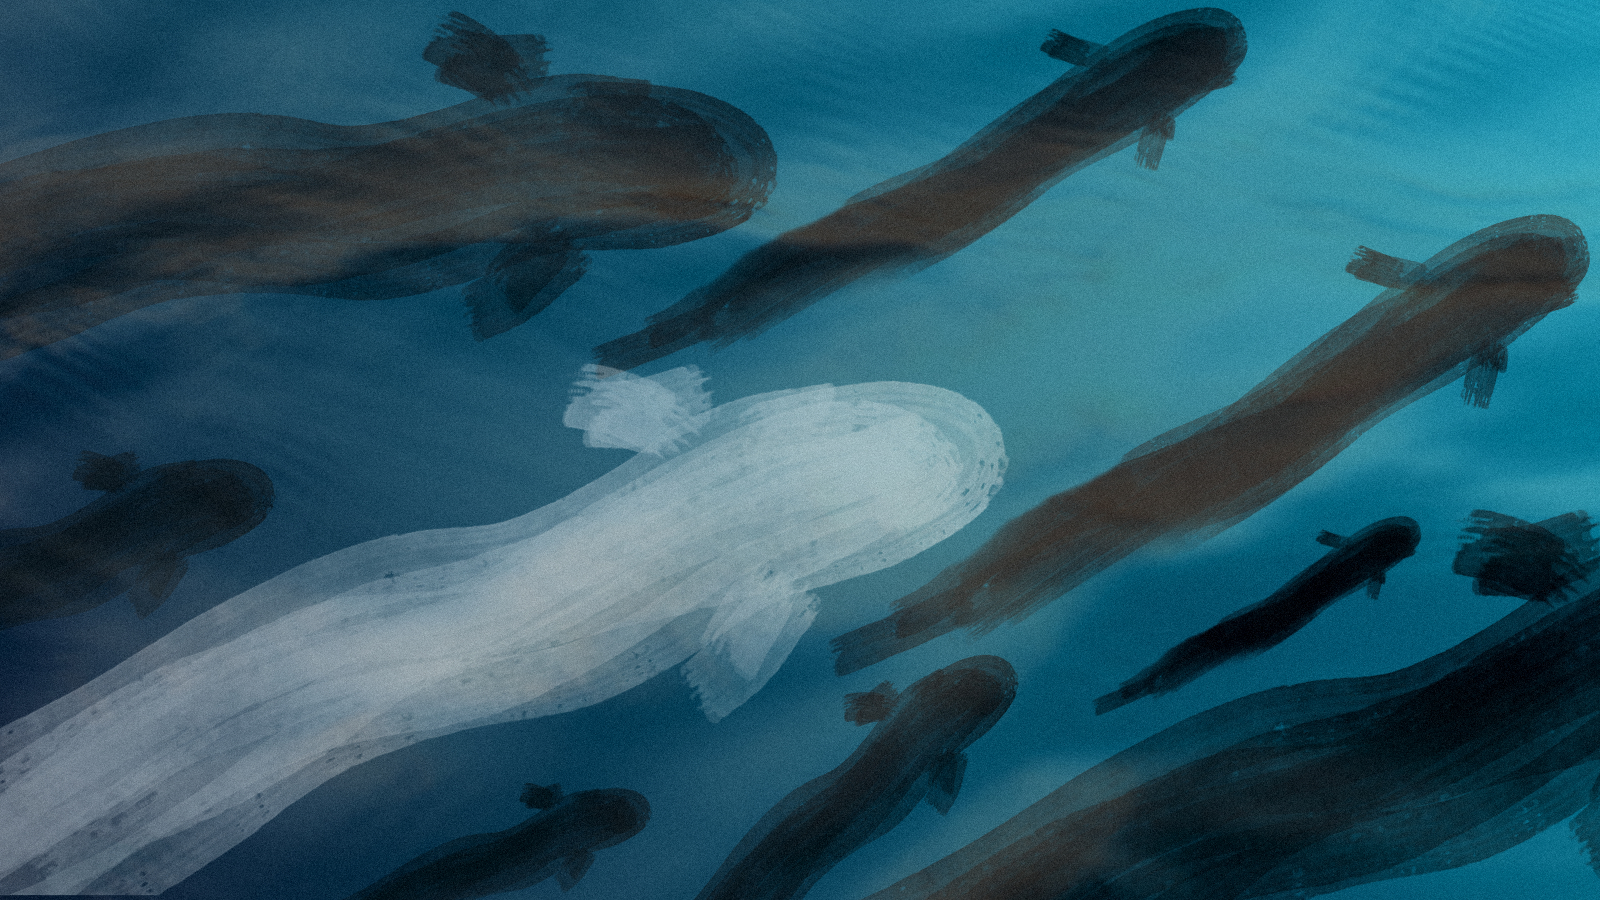 A group of eels swim in a river. A white eel is prominent in the foreground.